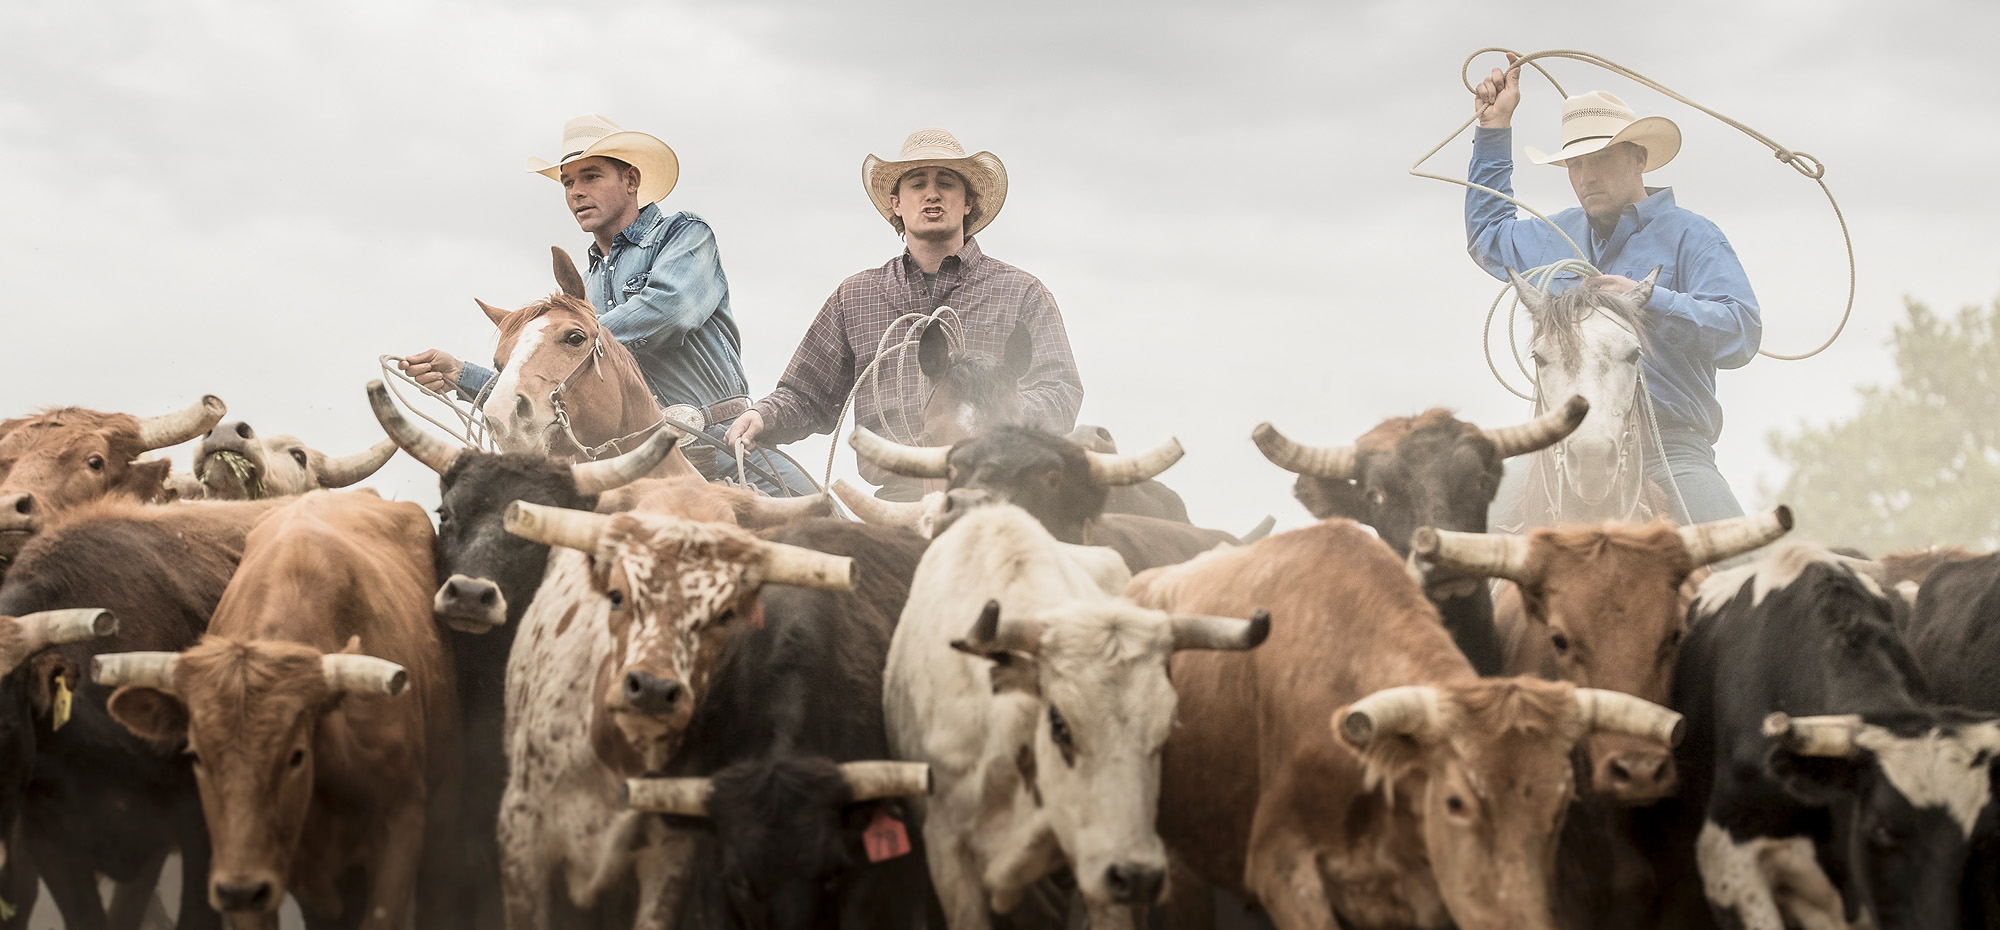 Western Cattle Drive With Three Cowboys